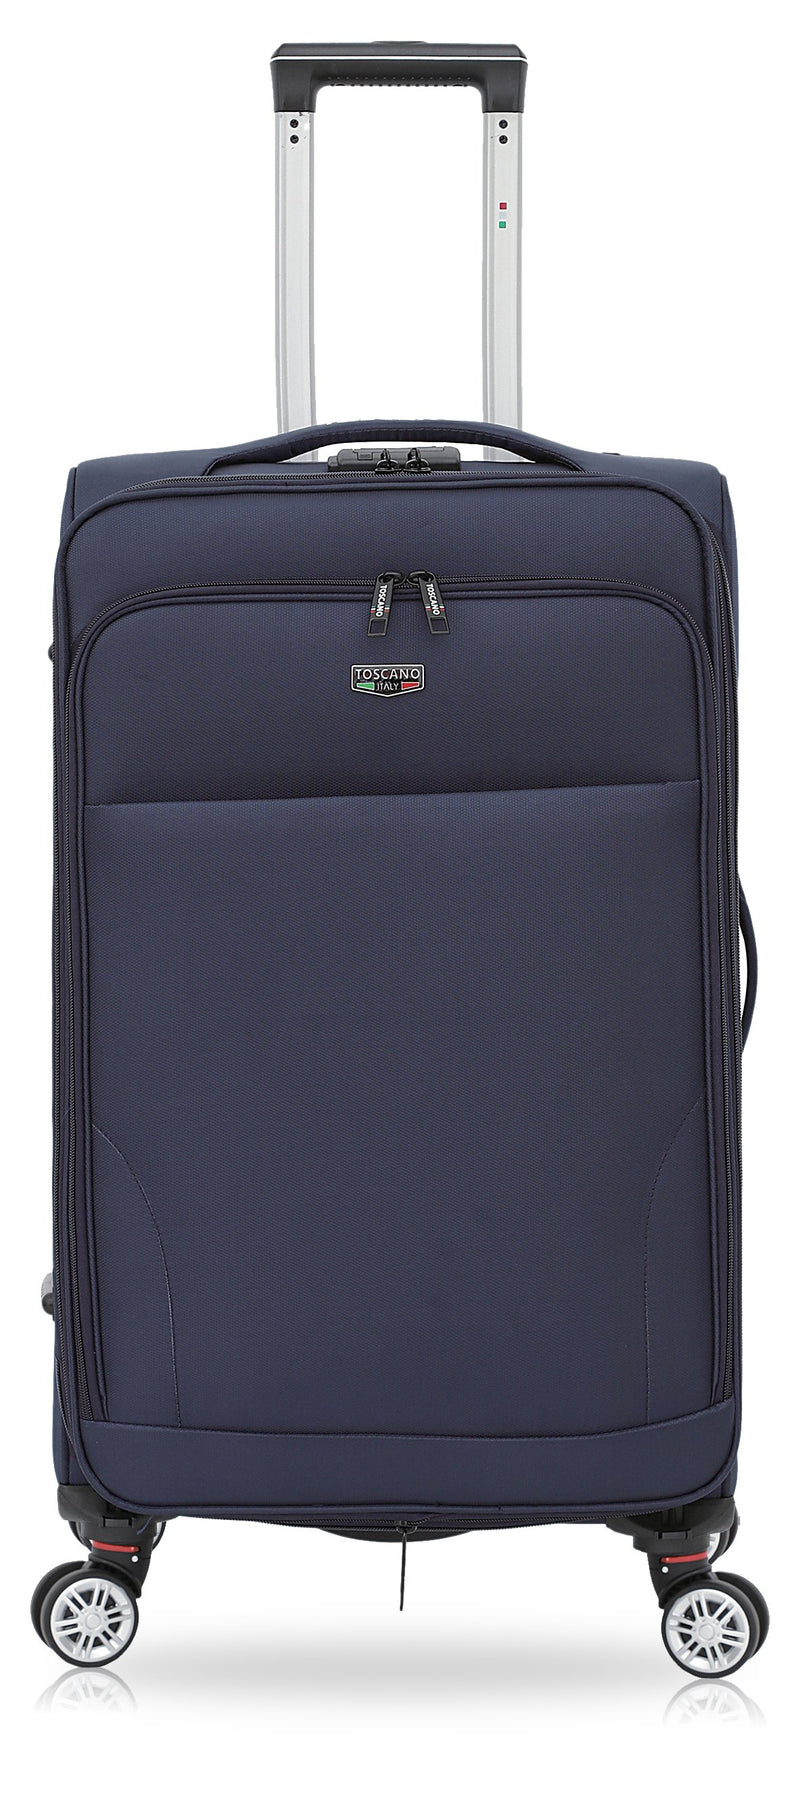 TOSCANO 21-inch Ricerca Lightweight Carry On  Luggage Suitcase